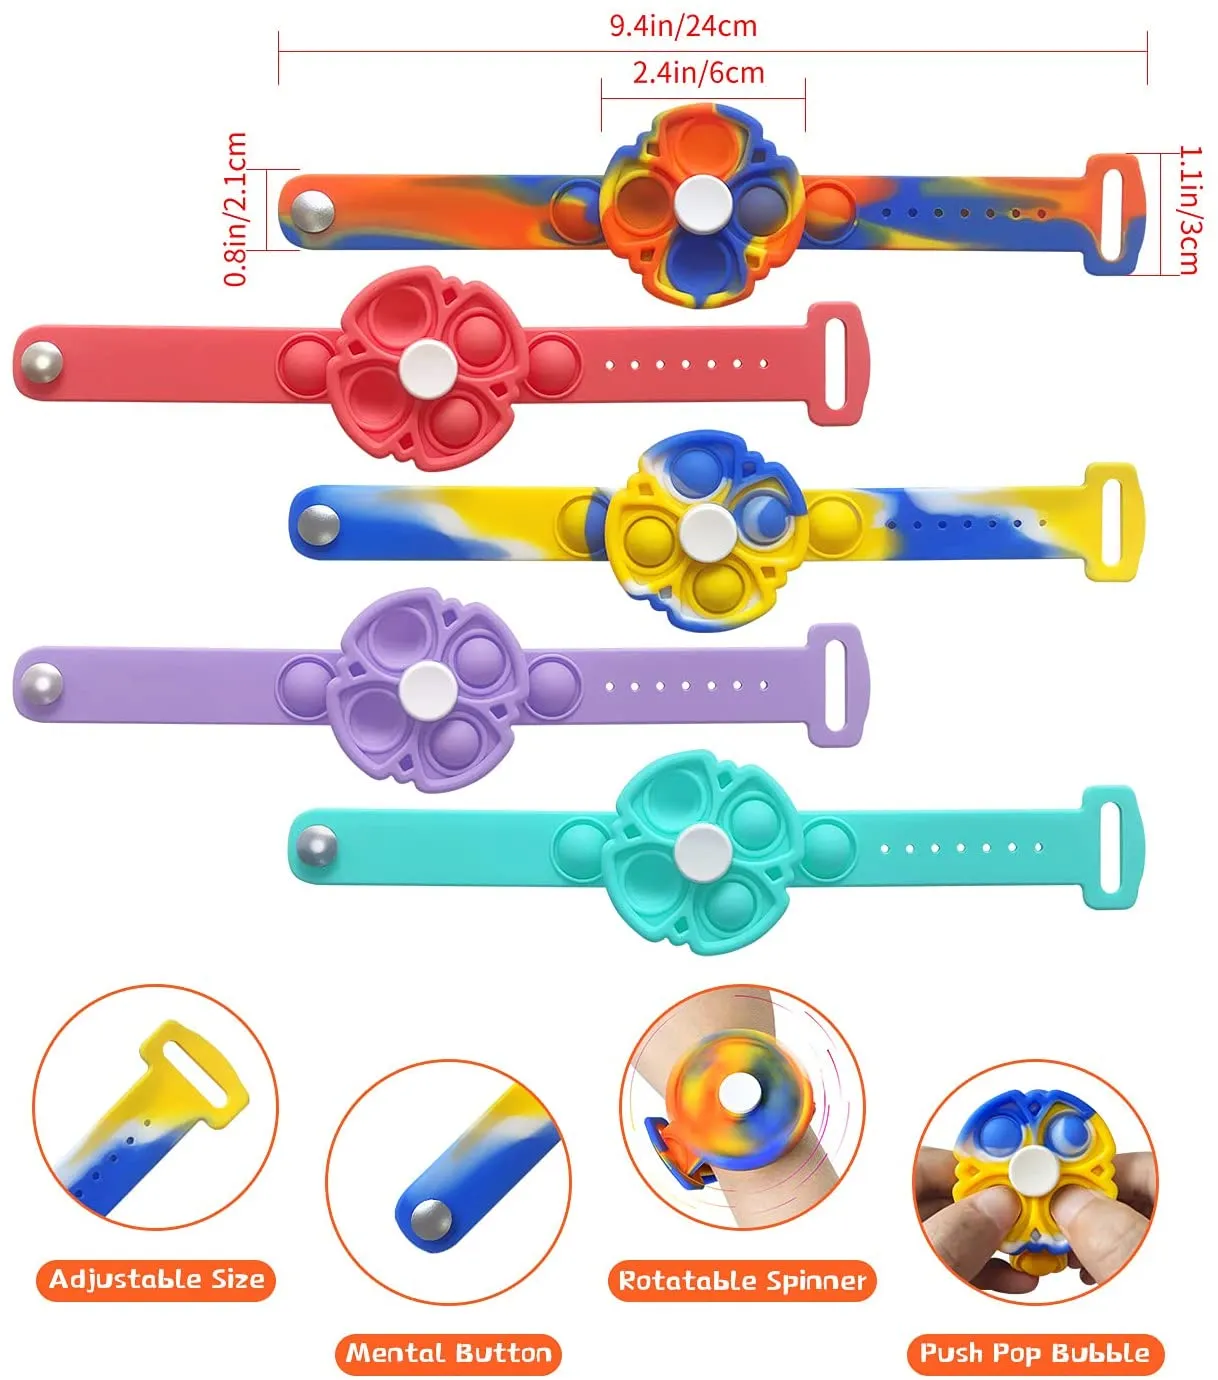 Bracelet Spinner, Push Bubble Sensory Toys Stress Relief Watch for Kids Adults ADHD Autism 2980482